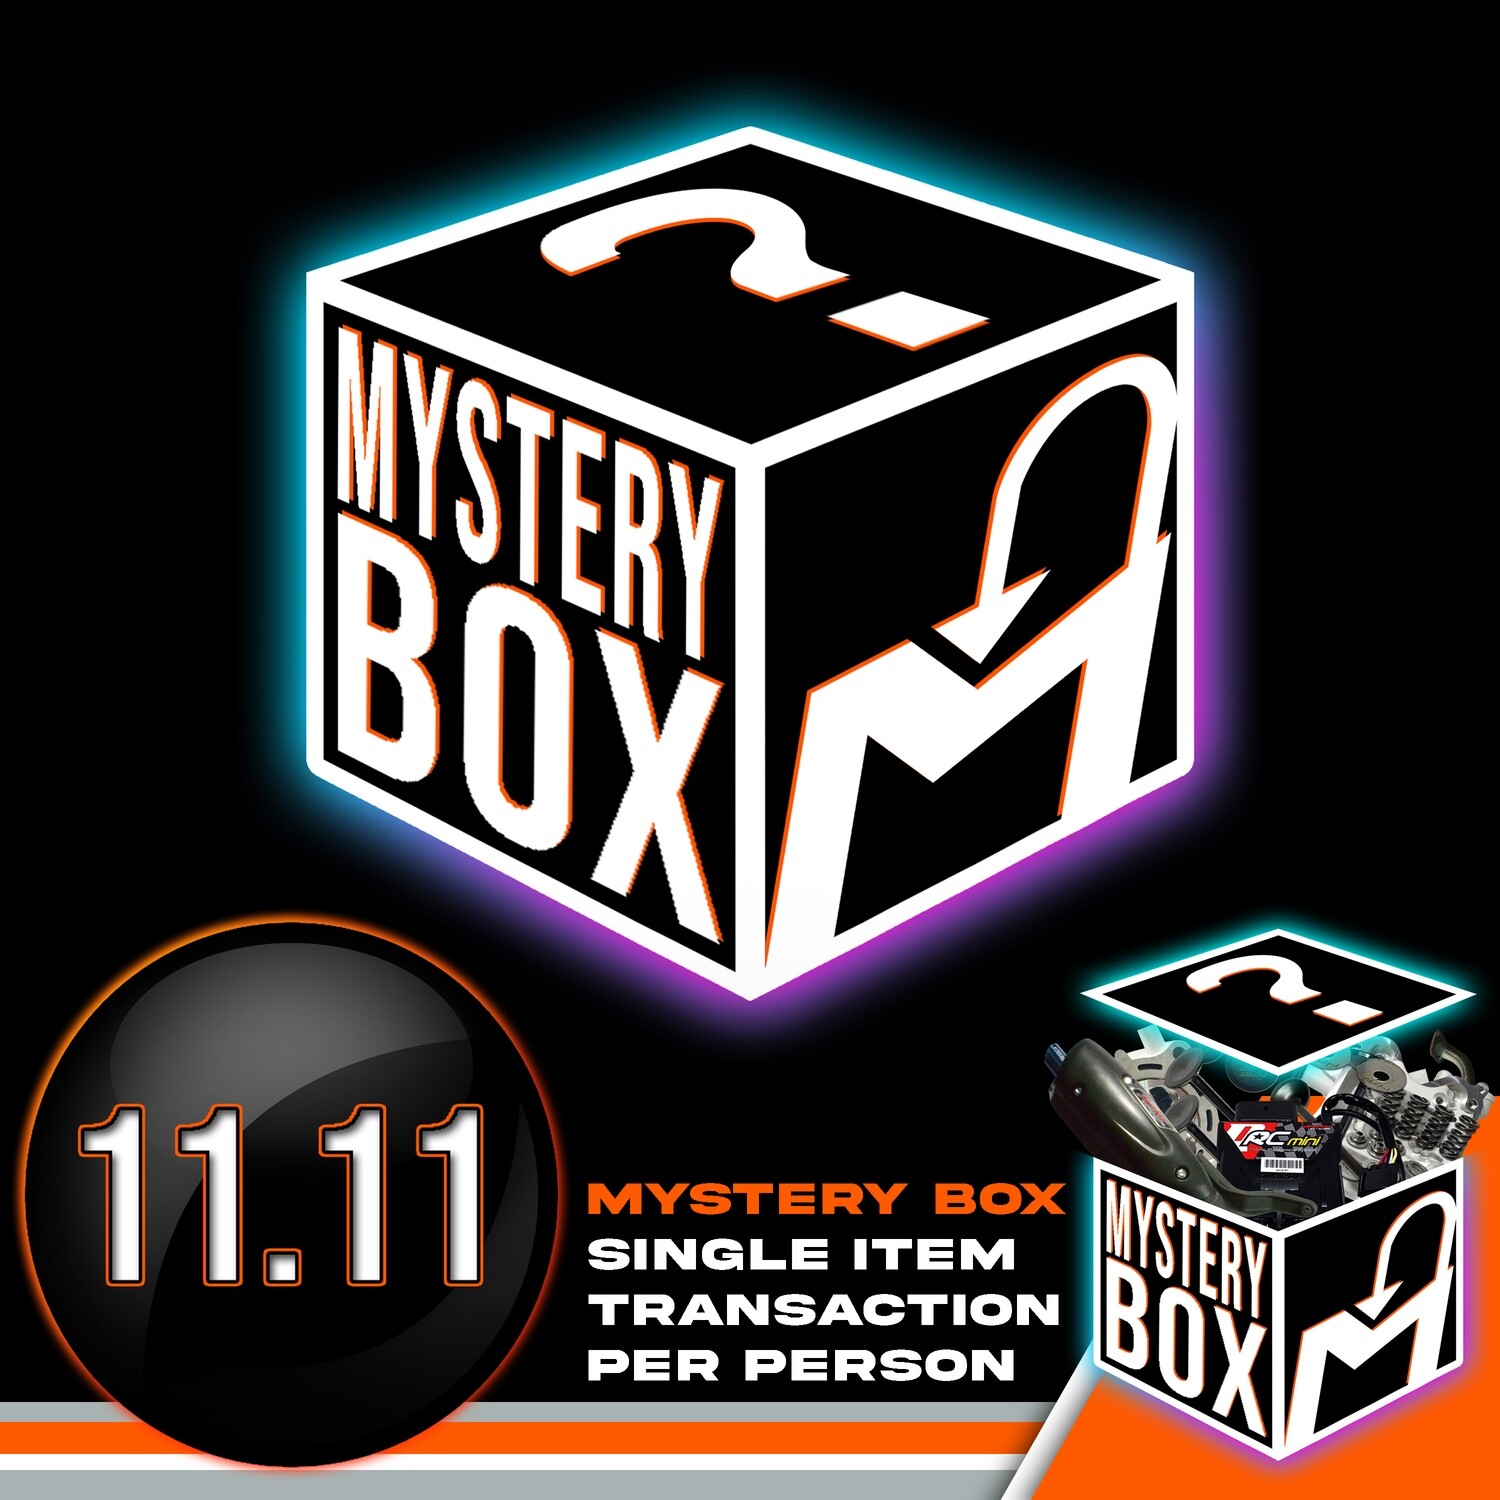 MYSTERY BOX #152 ( 11.11 PROMO EXTENDED )